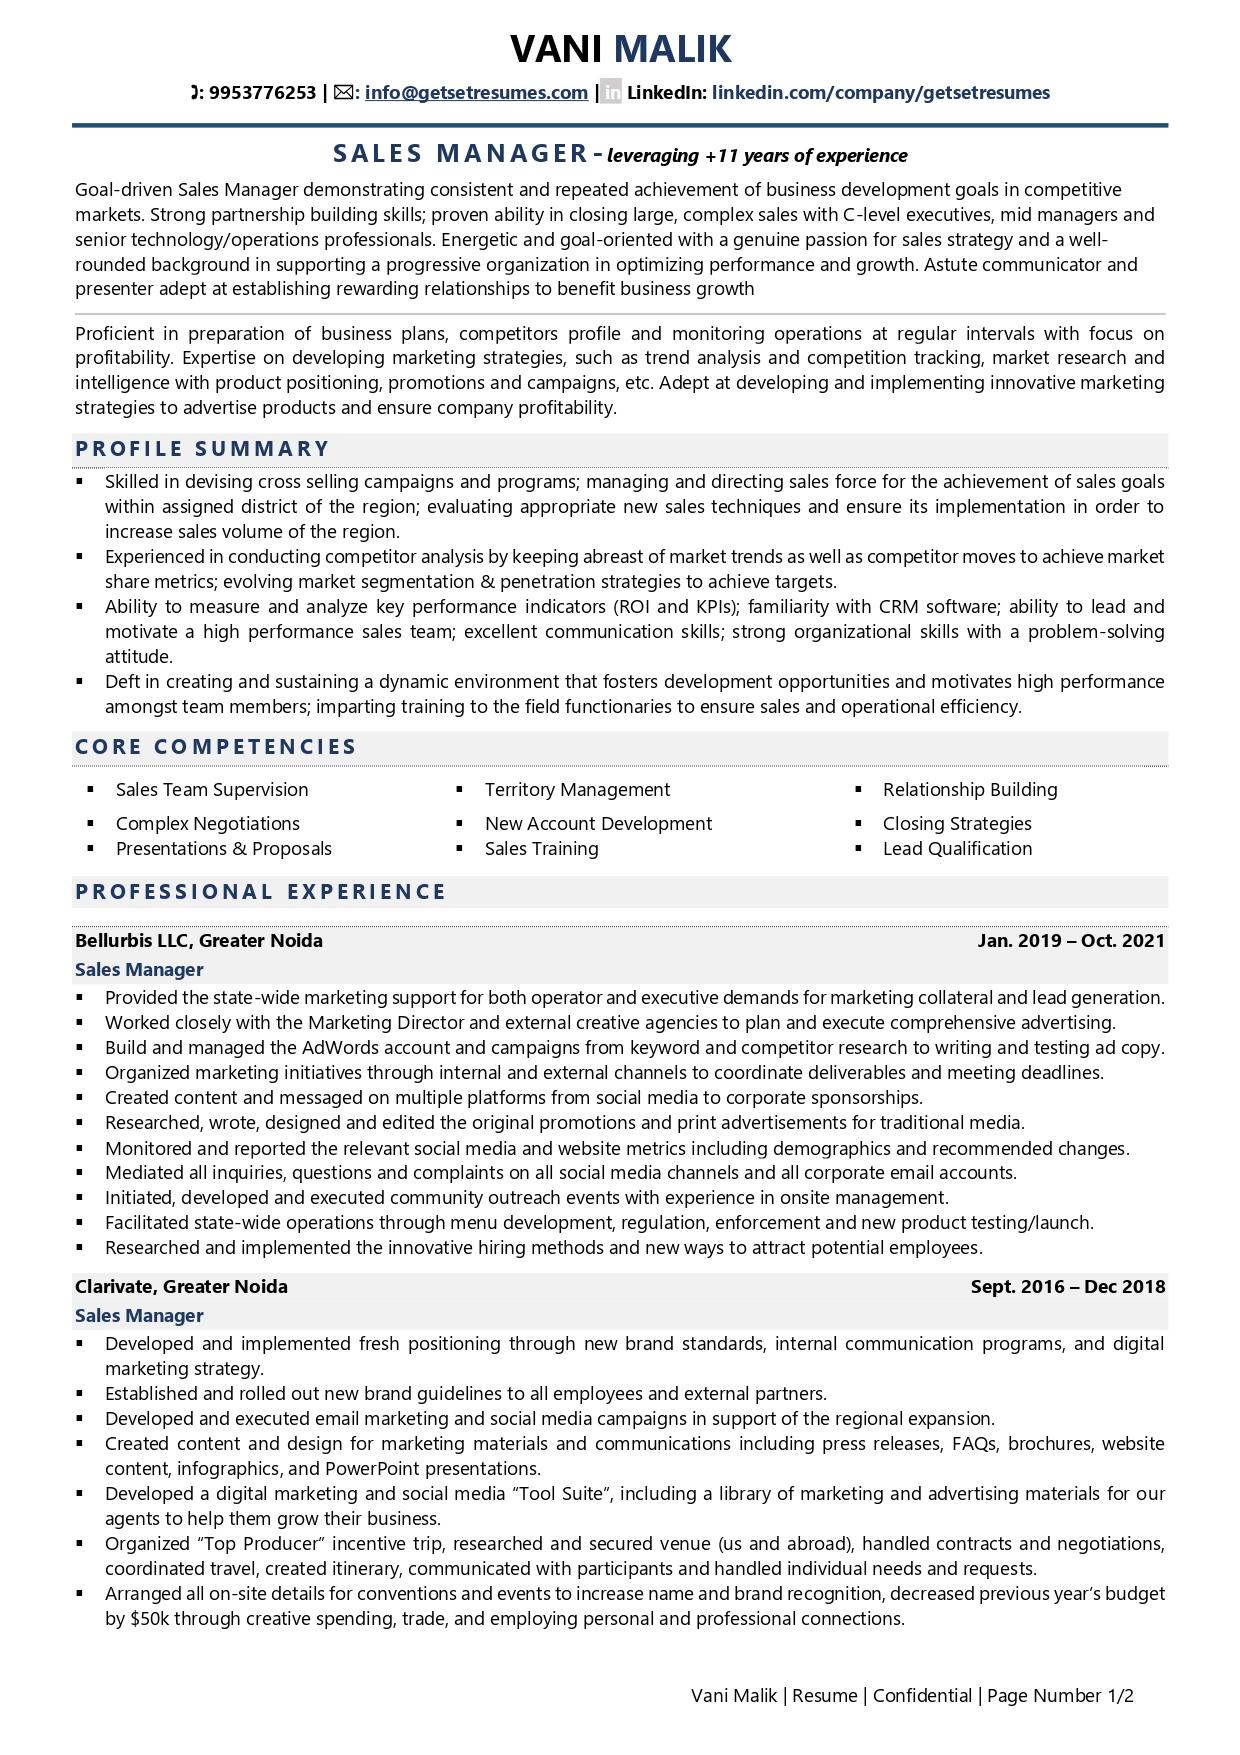 Sales Manager - Resume Example & Template